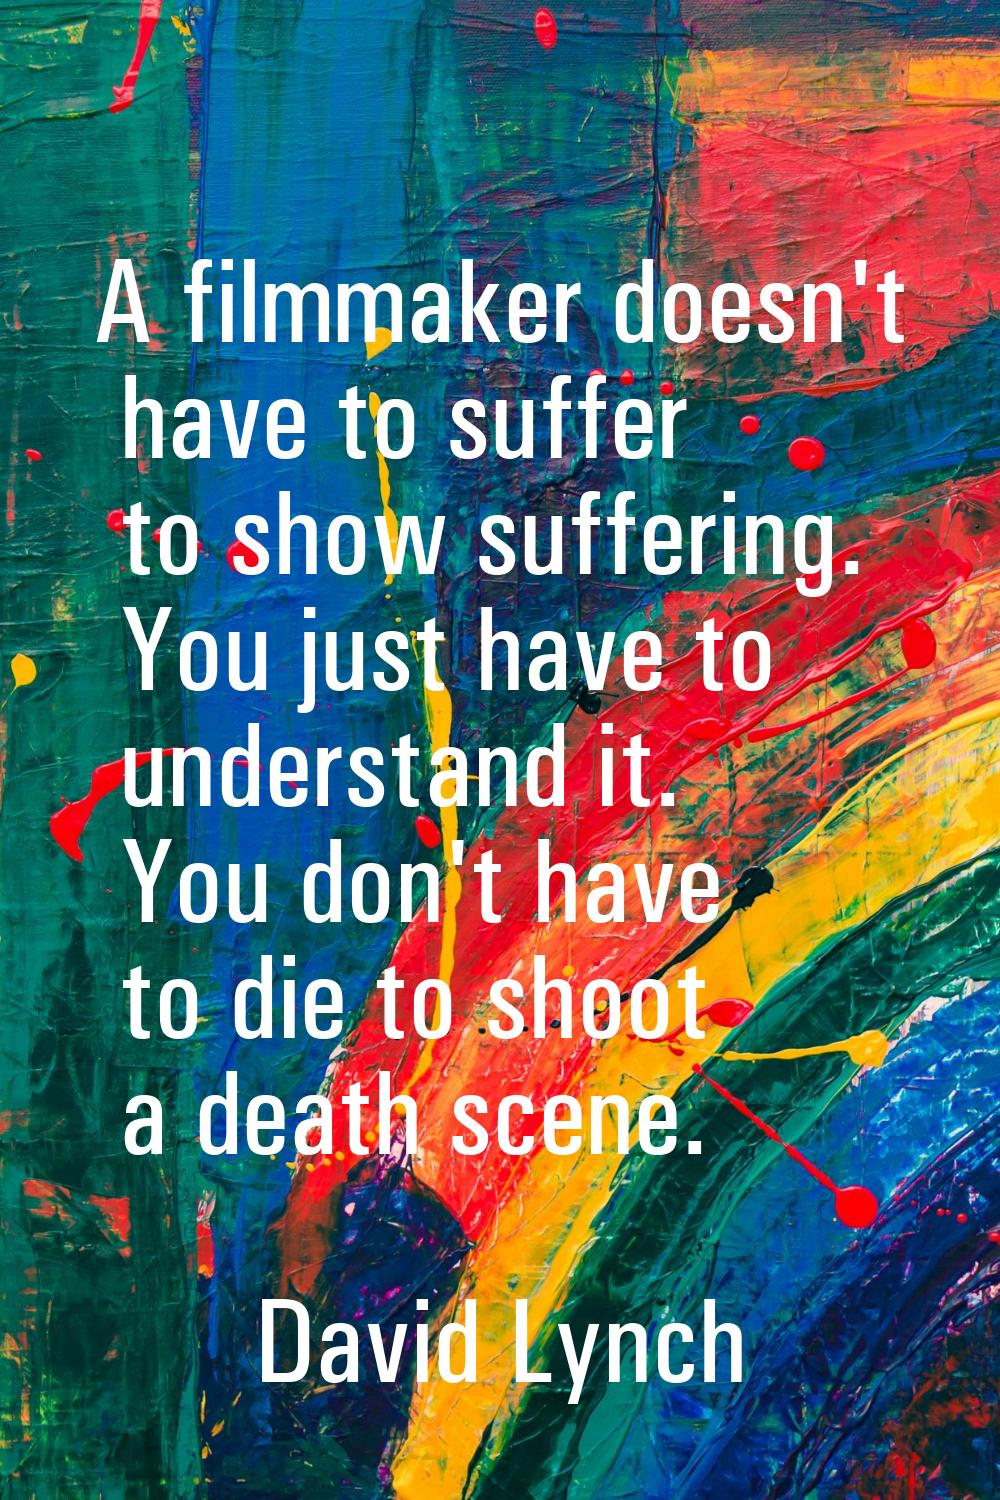 A filmmaker doesn't have to suffer to show suffering. You just have to understand it. You don't hav